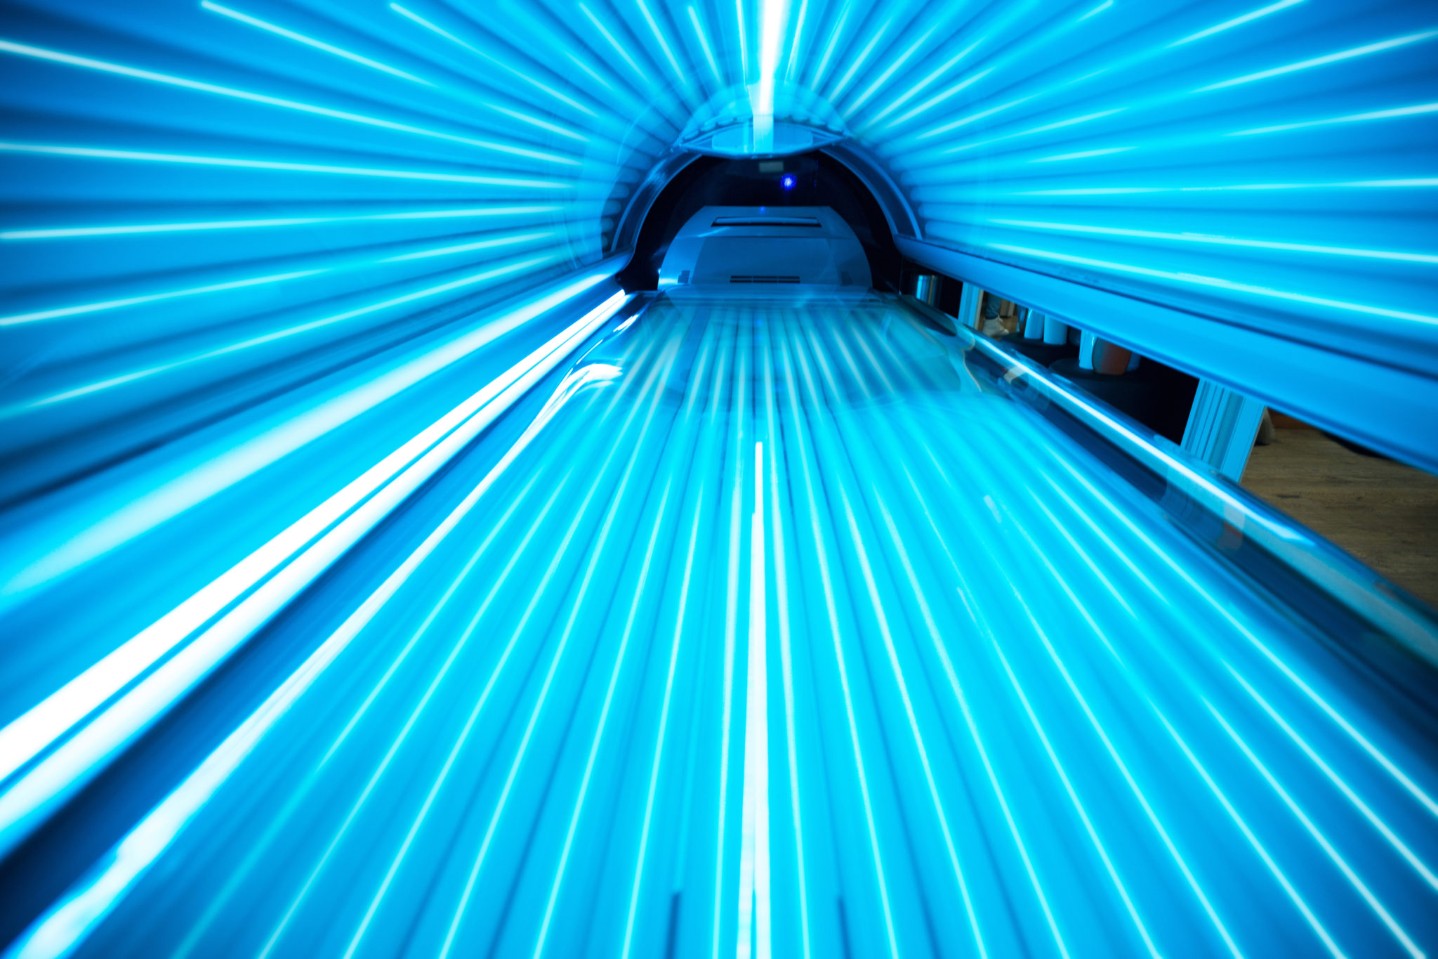 tanning-bed